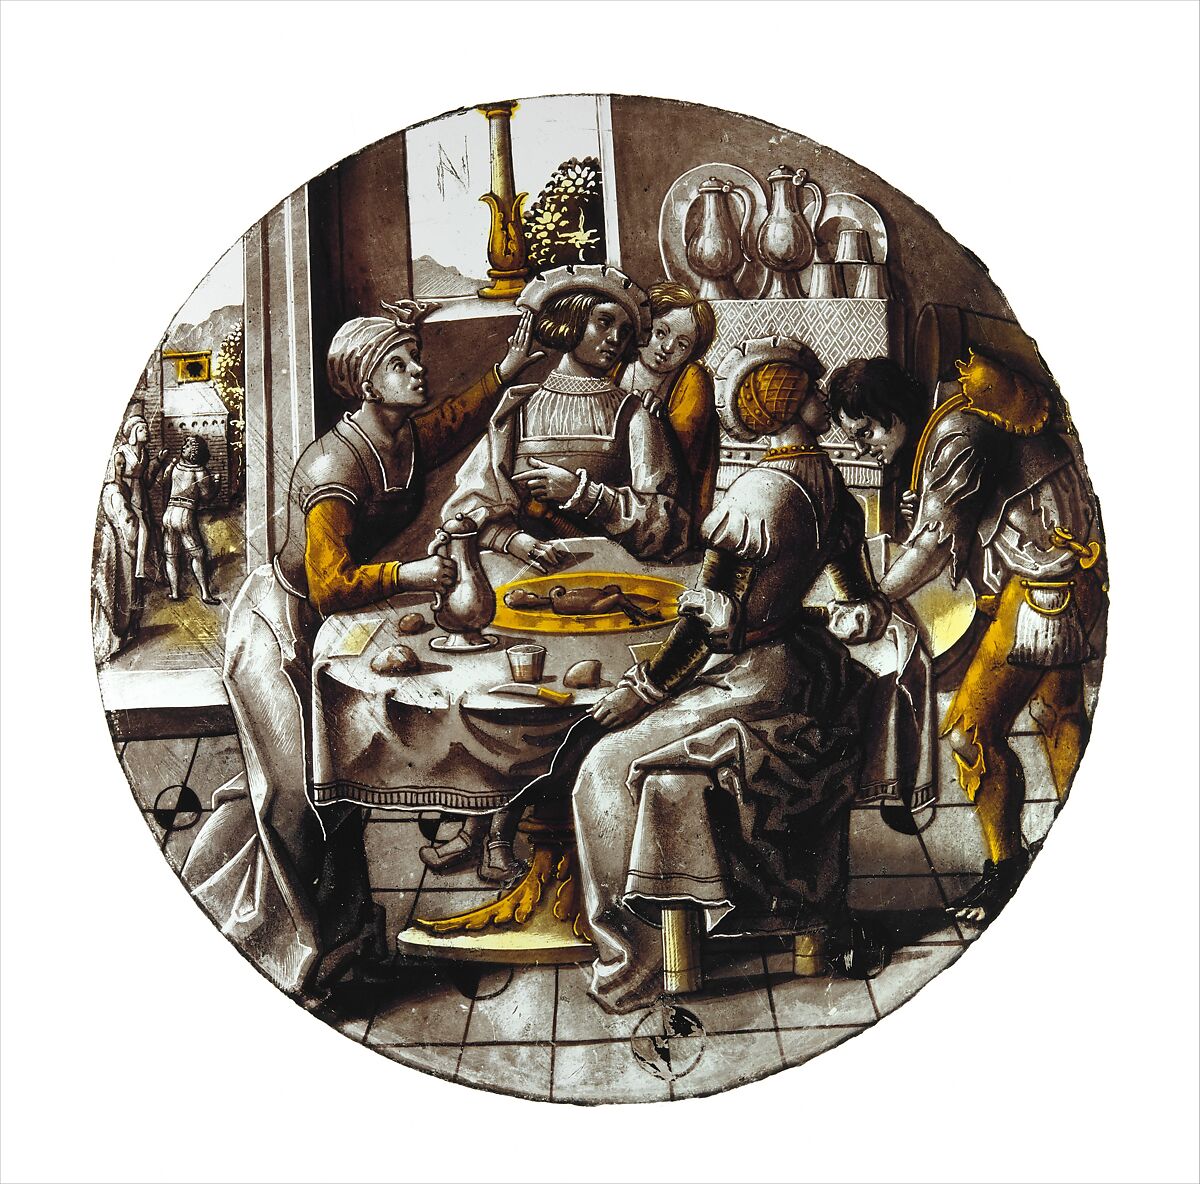 Roundel with Sorgheloos ("Carefree") with Easy Fortune, Colorless glass, vitreous paint and silver stain, North Netherlandish 